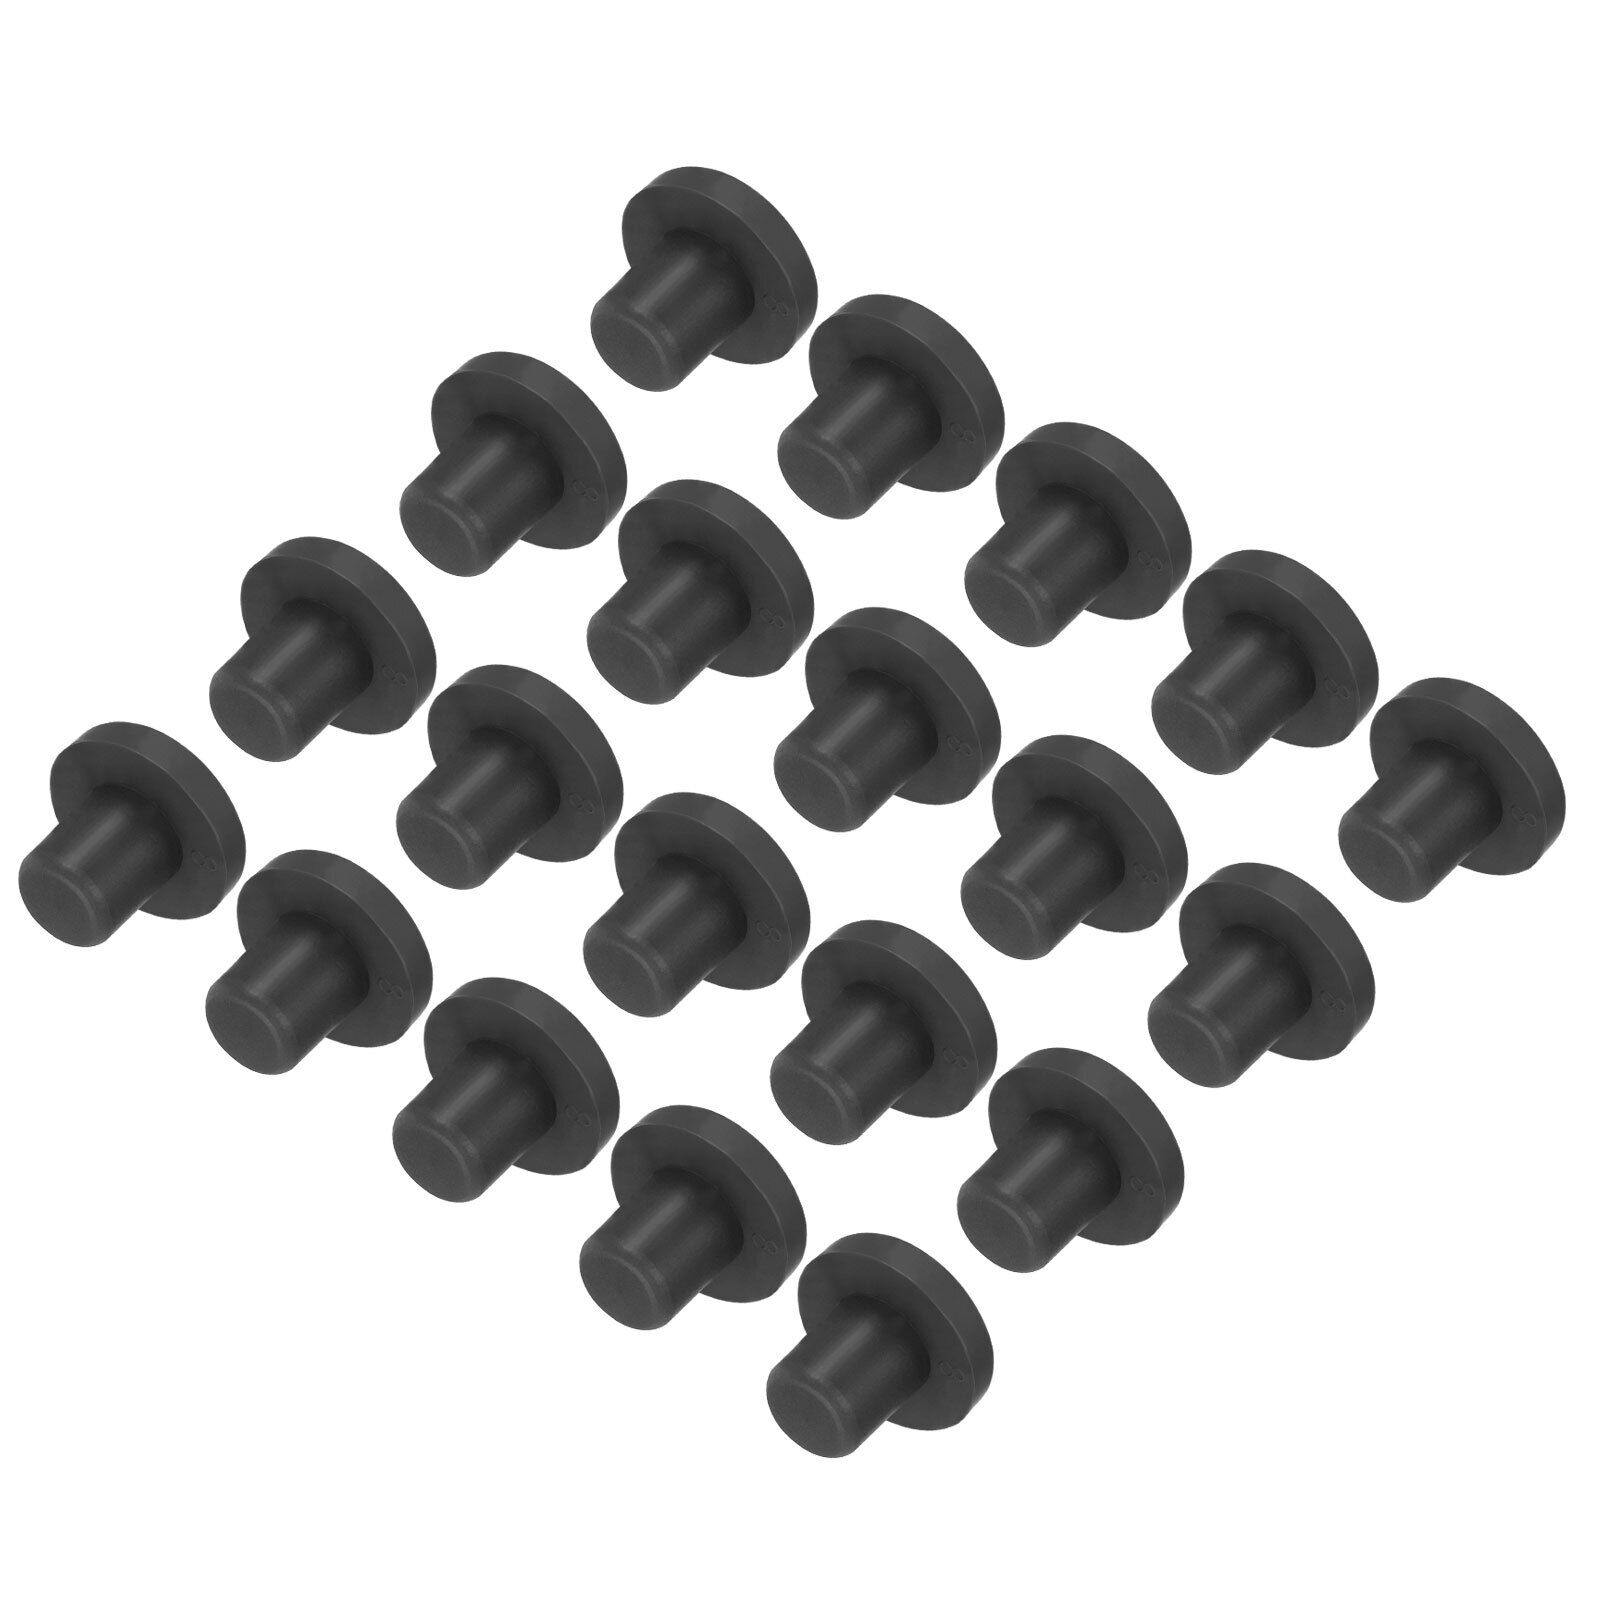 20pcs High Temp Silicone Plug Mount 8mm T Shaped Solid Rubber Stopper Hole Plugs